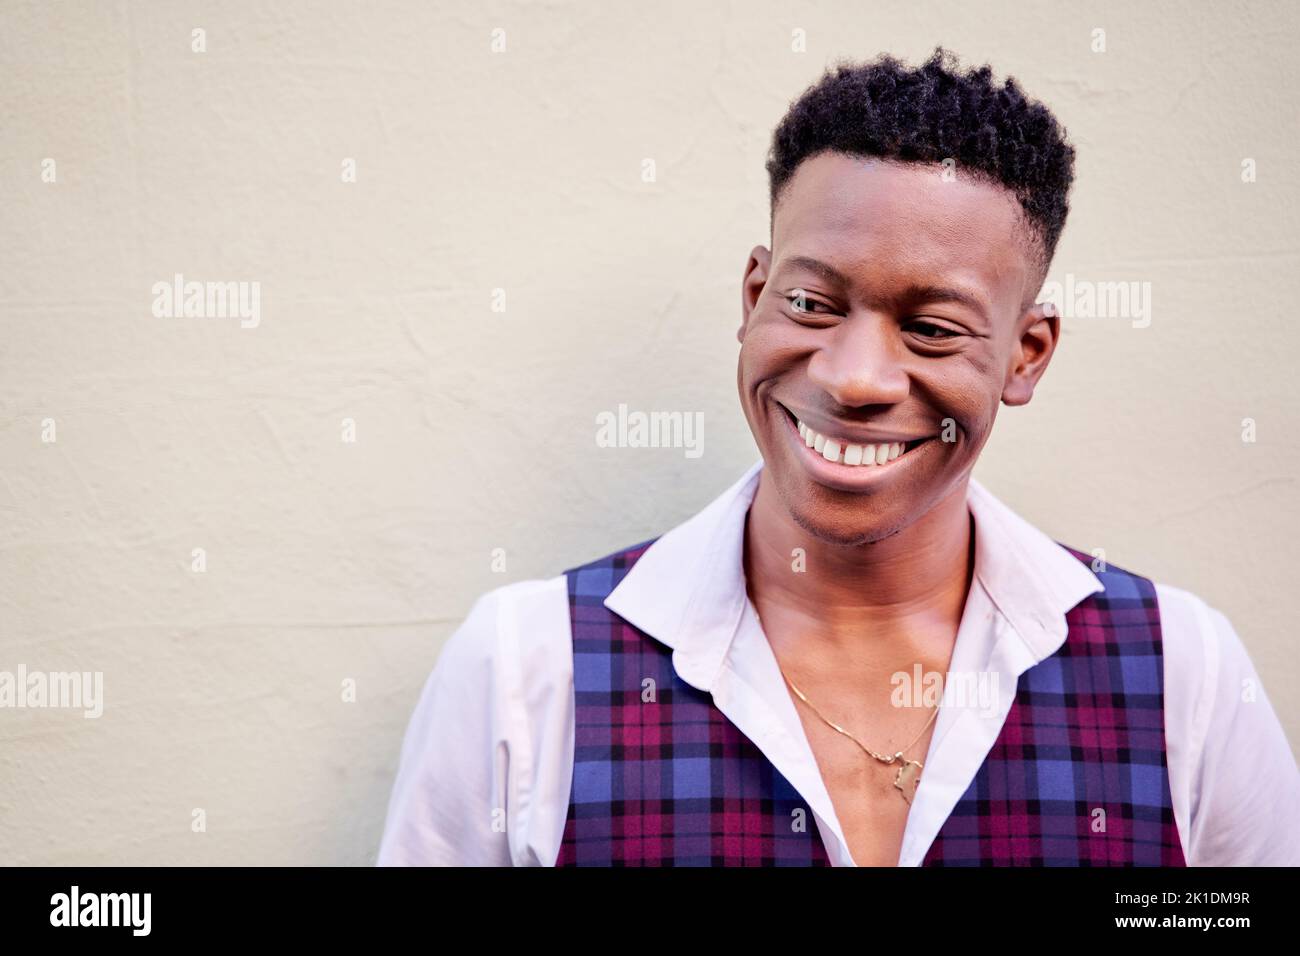 close-up of a stylish African-American man laughing out loud Stock Photo